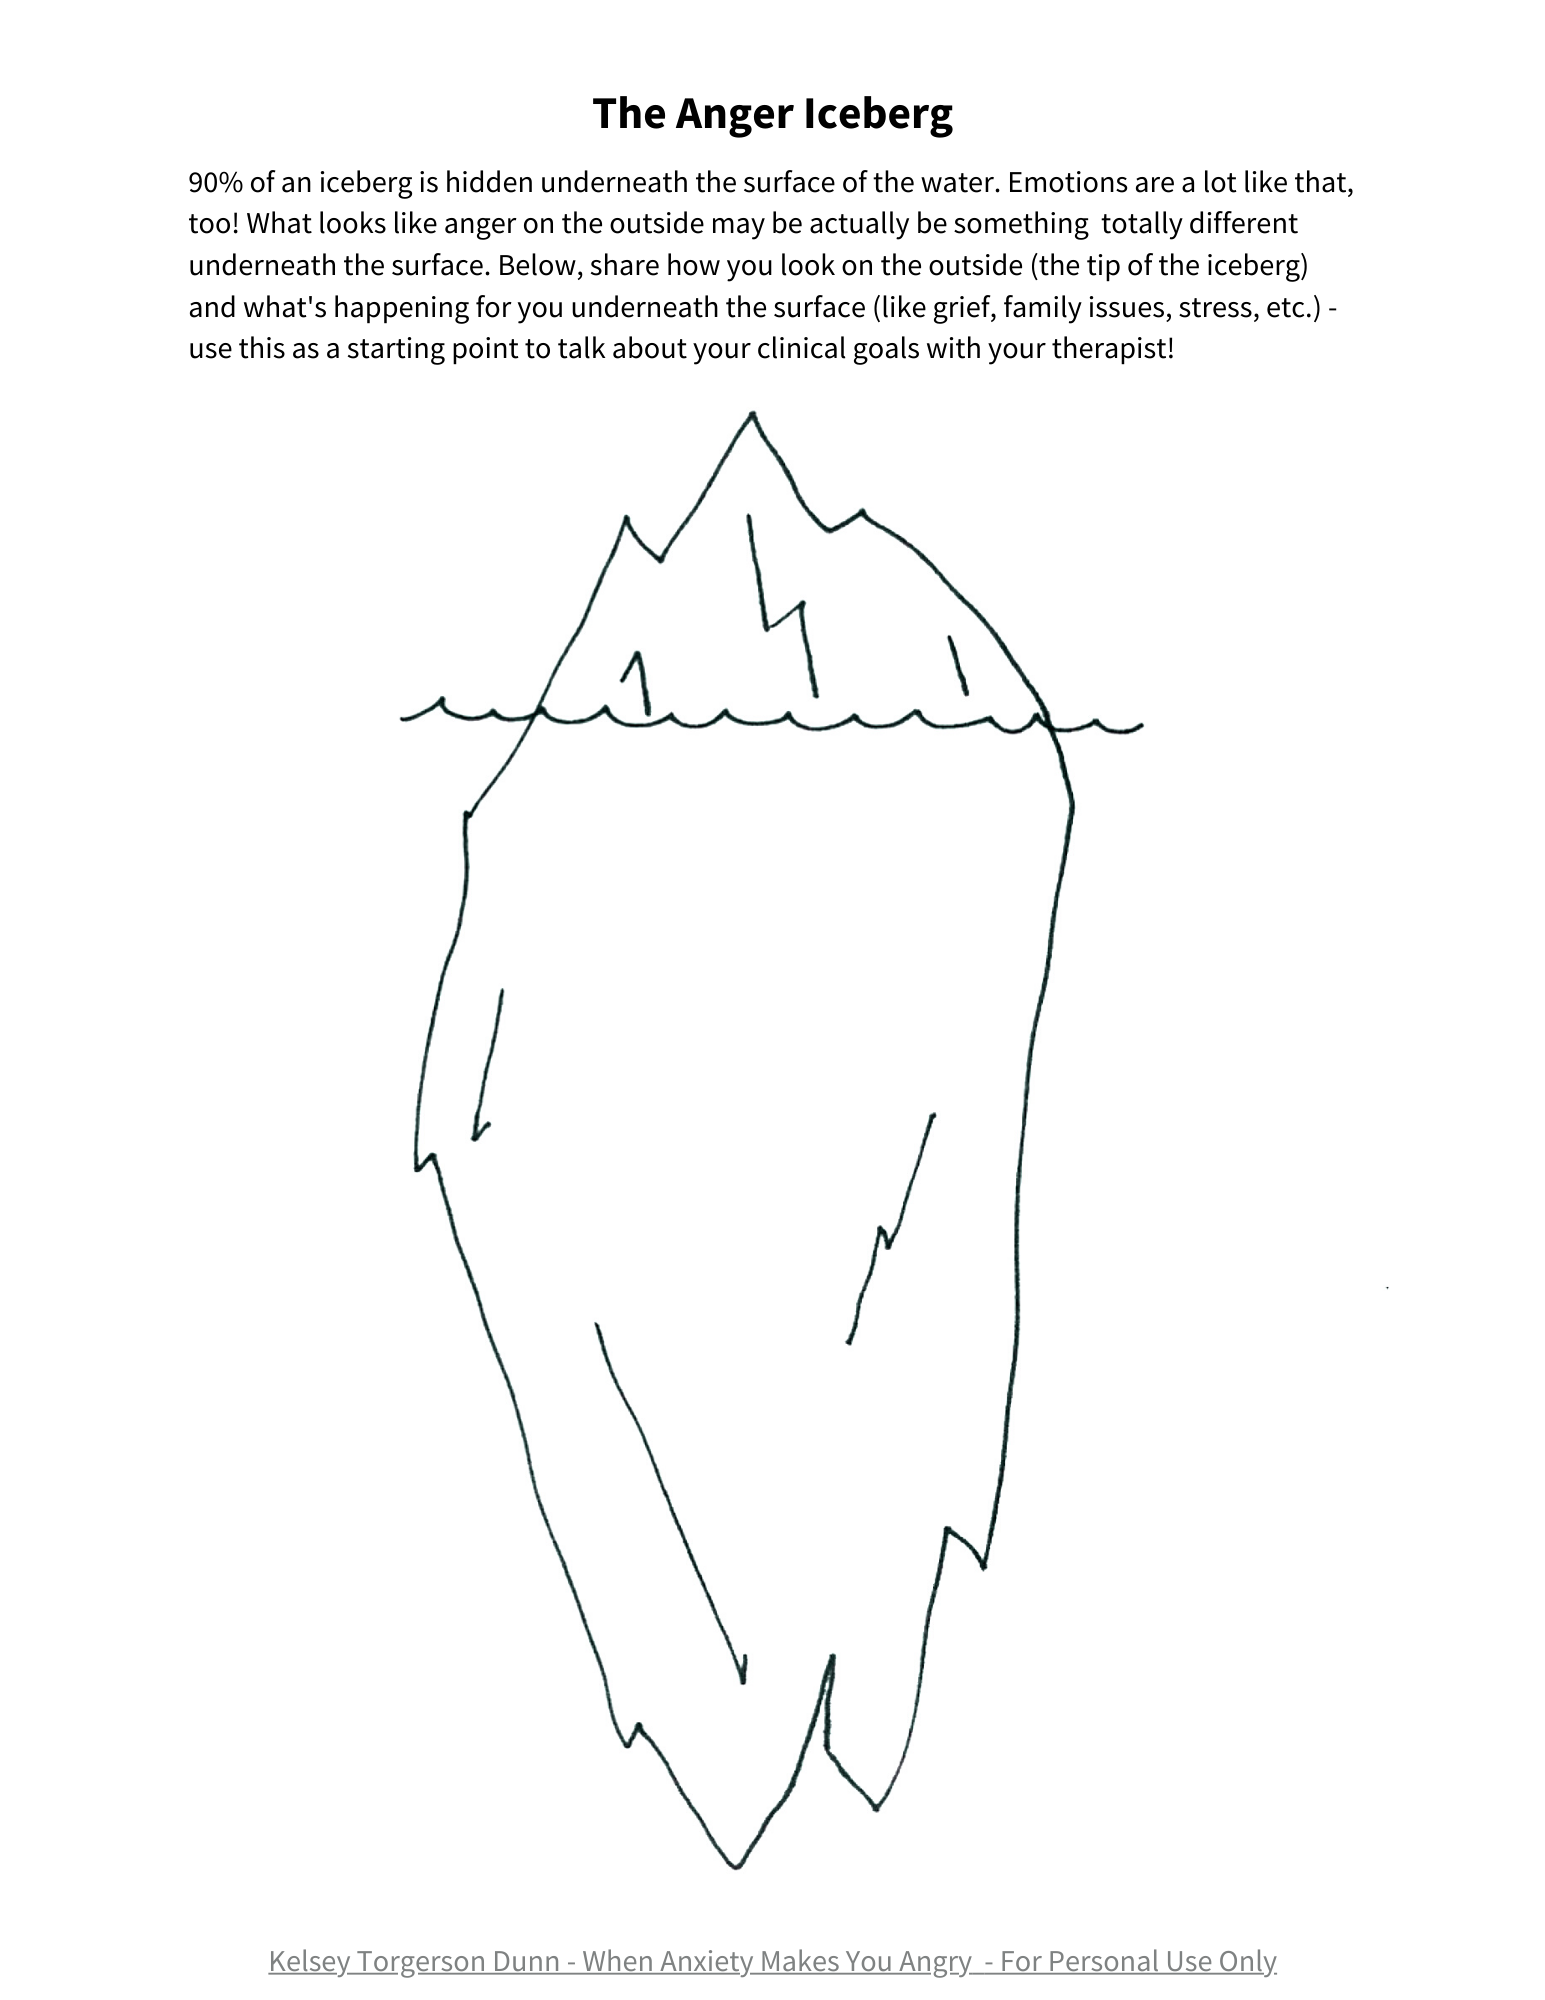 the-anger-iceberg-anxiety-driven-anger-and-looking-underneath-the-surface-compassionate